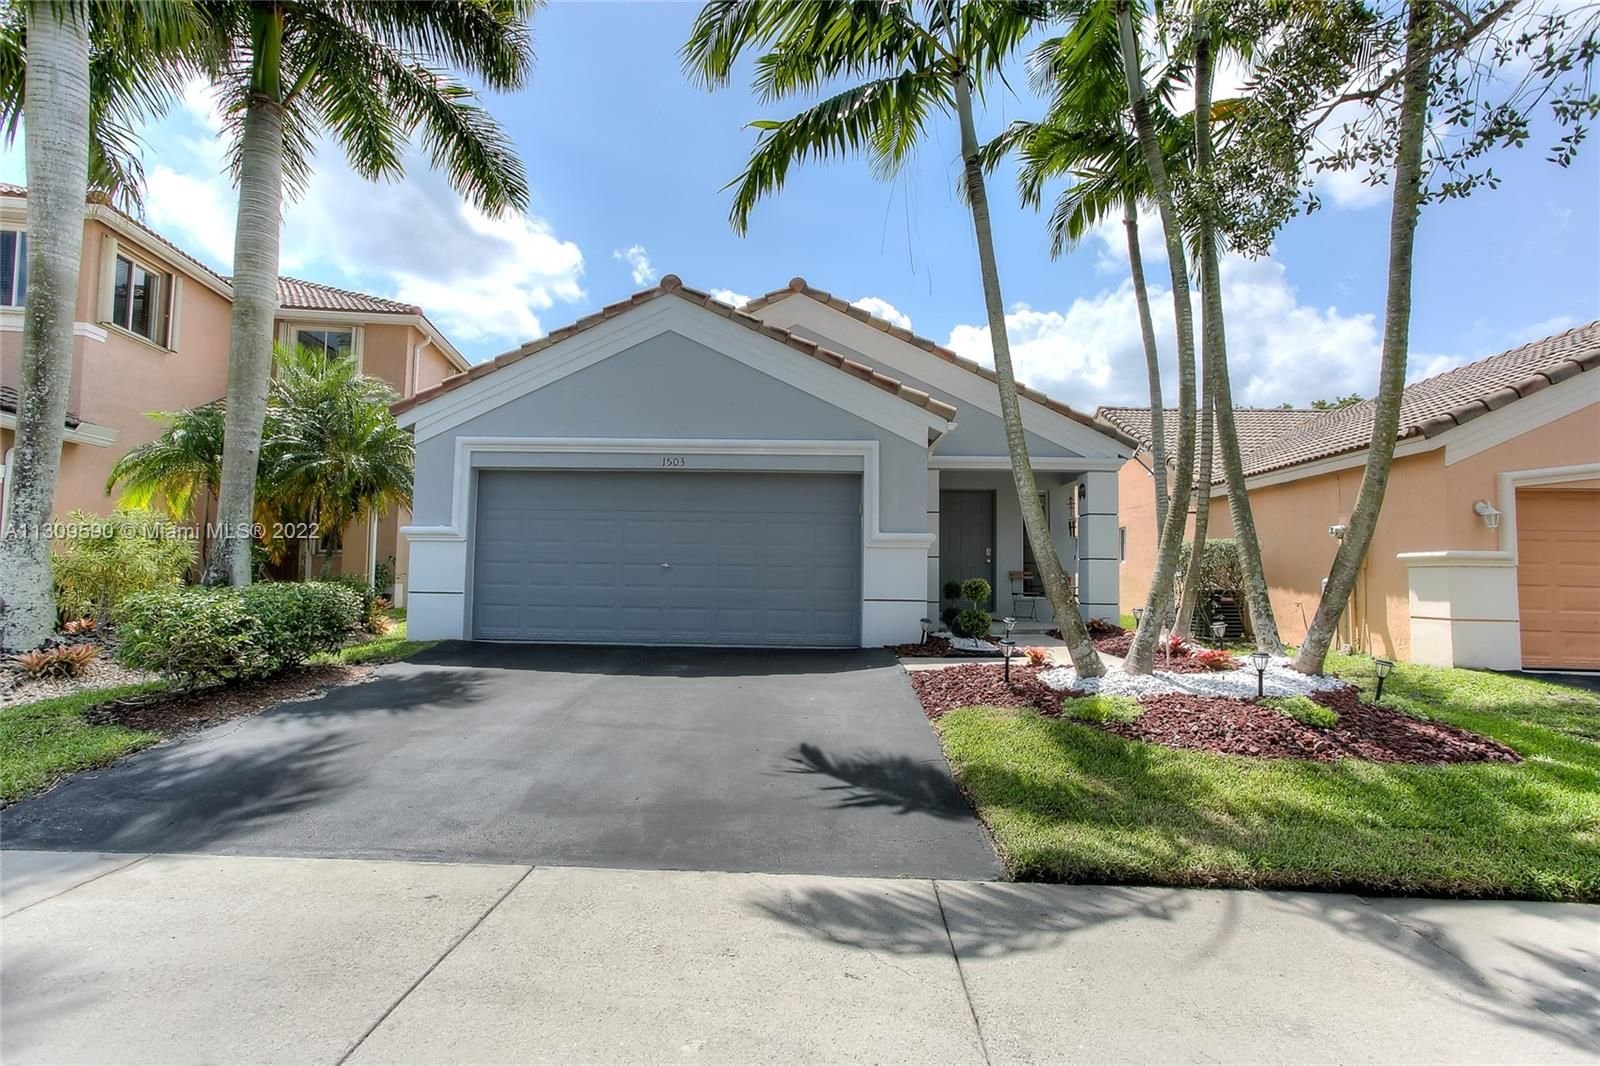 Real estate property located at 1503 Sunset Way, Broward County, Weston, FL